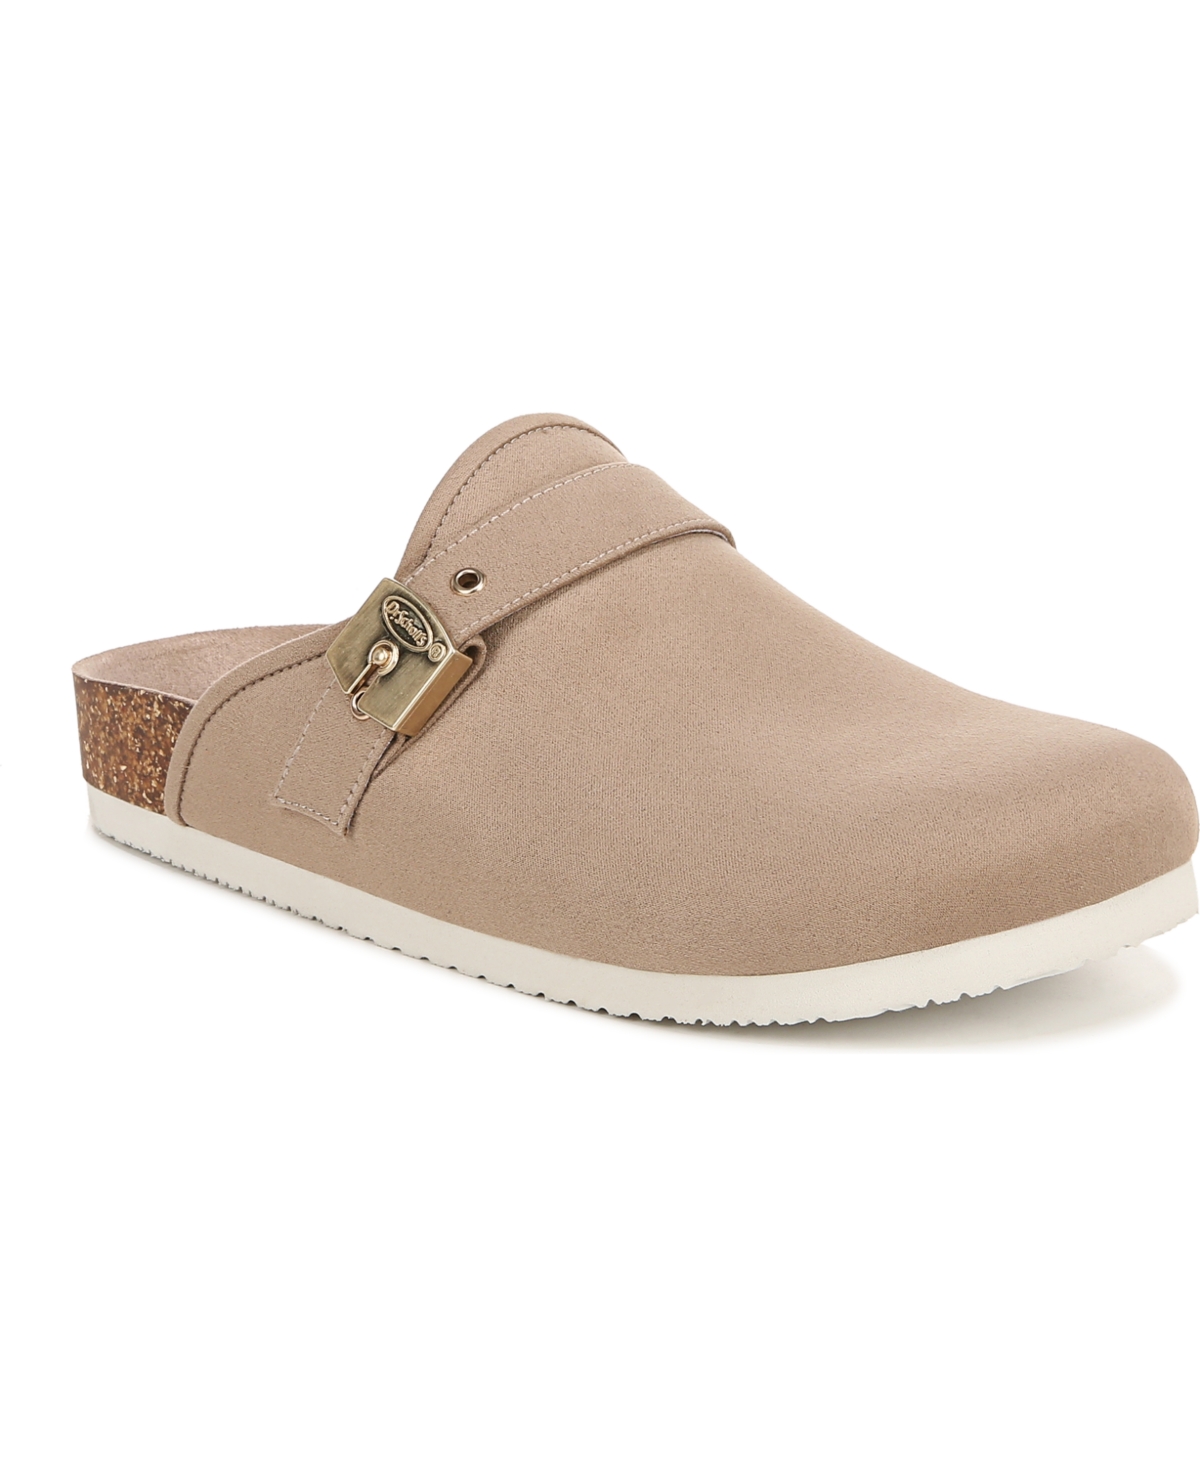 Dr. Scholl's Women's Louis Iconic Clogs In Mocha Taupe Microfiber